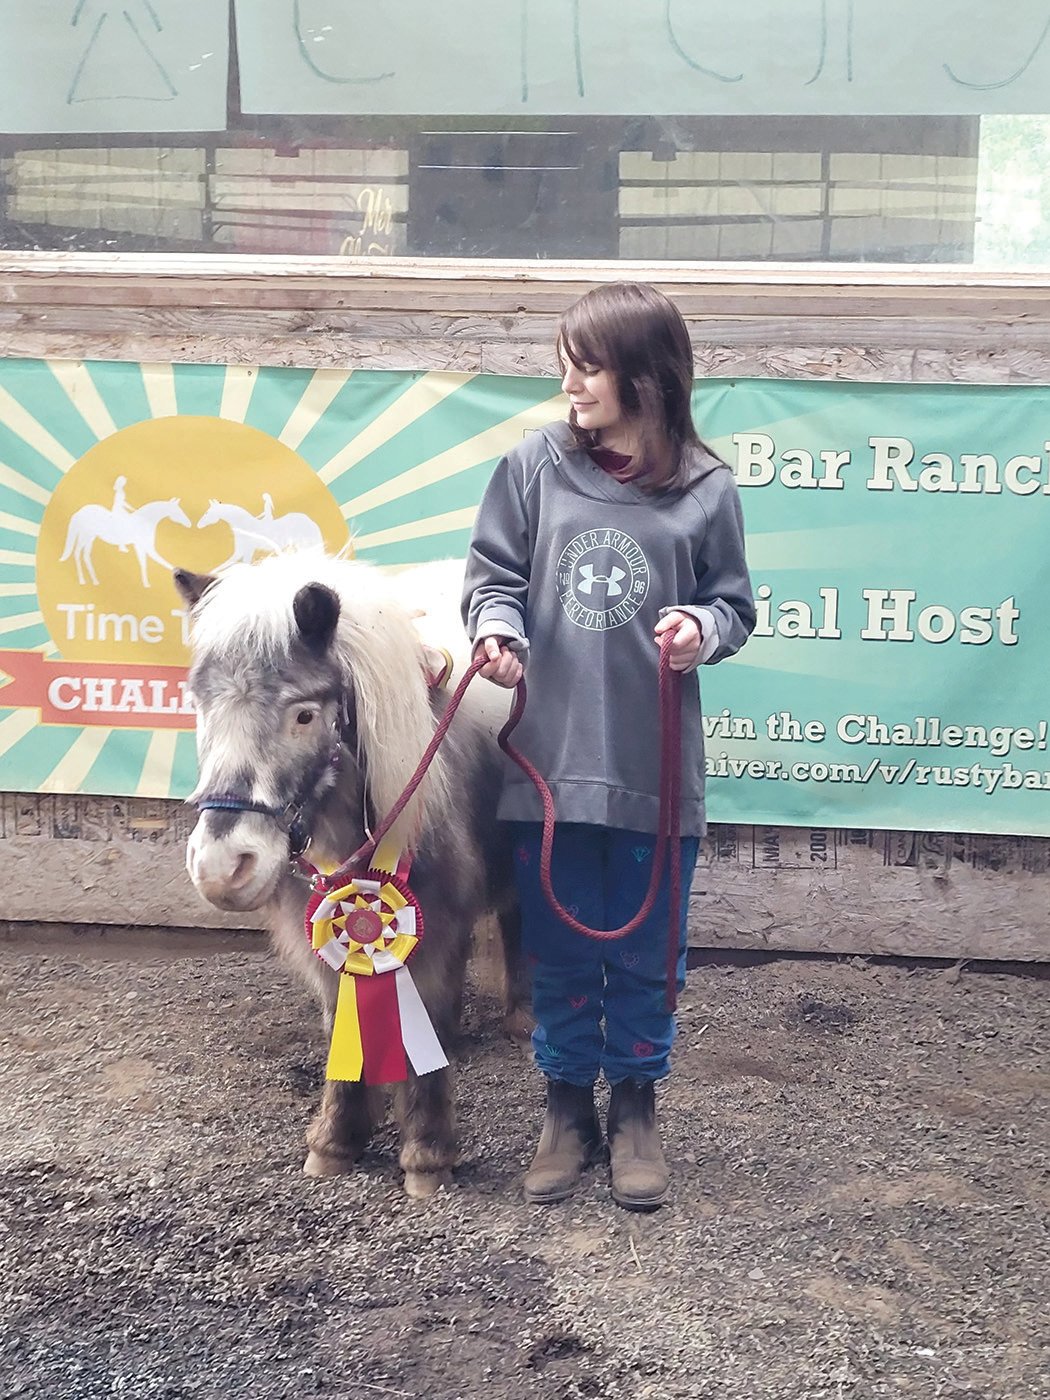 One of Kathy Richardson’s clients, 9-year-old Mackenzie Merkel, poses with Ghost, the mini-horse.